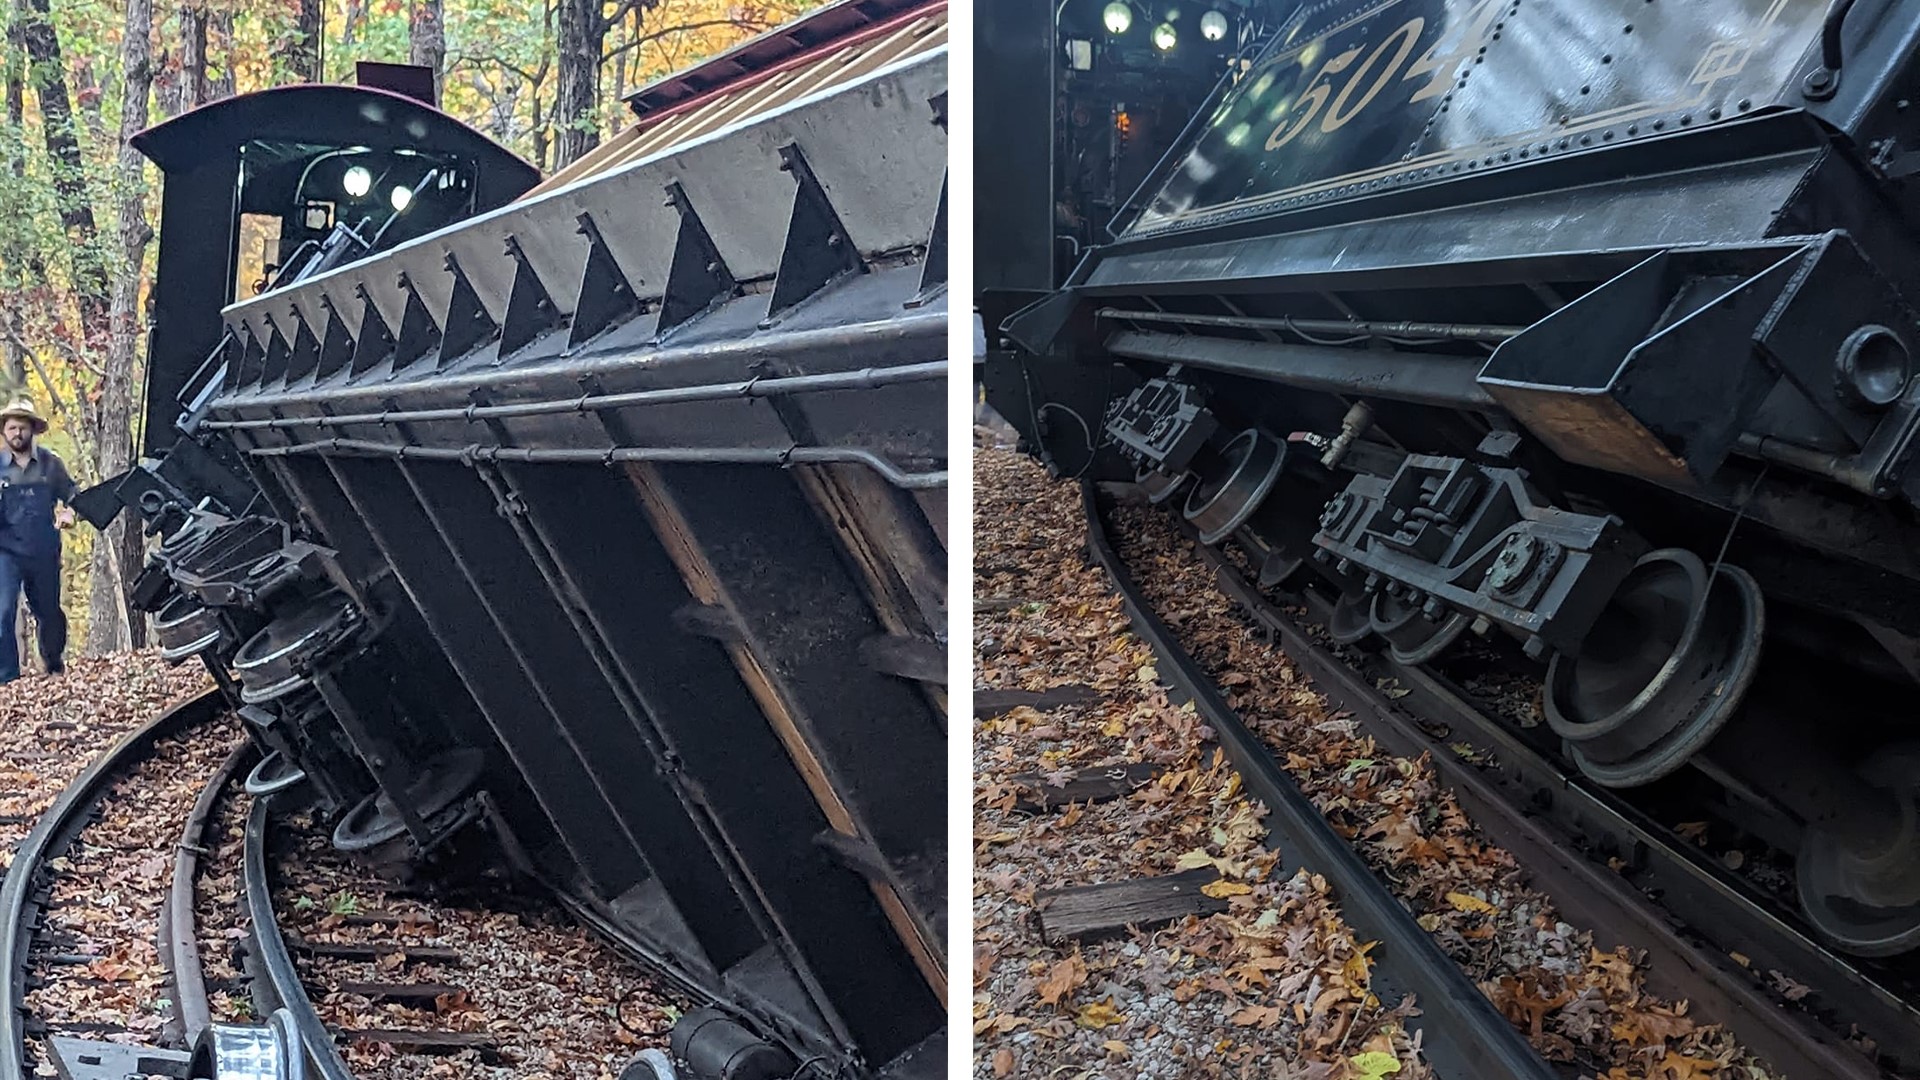 Multiple sections of the Frisco Silver Dollar Line Steam train derailed from the track at Silver Dollar City Amusement Park in Stone County, Missouri.